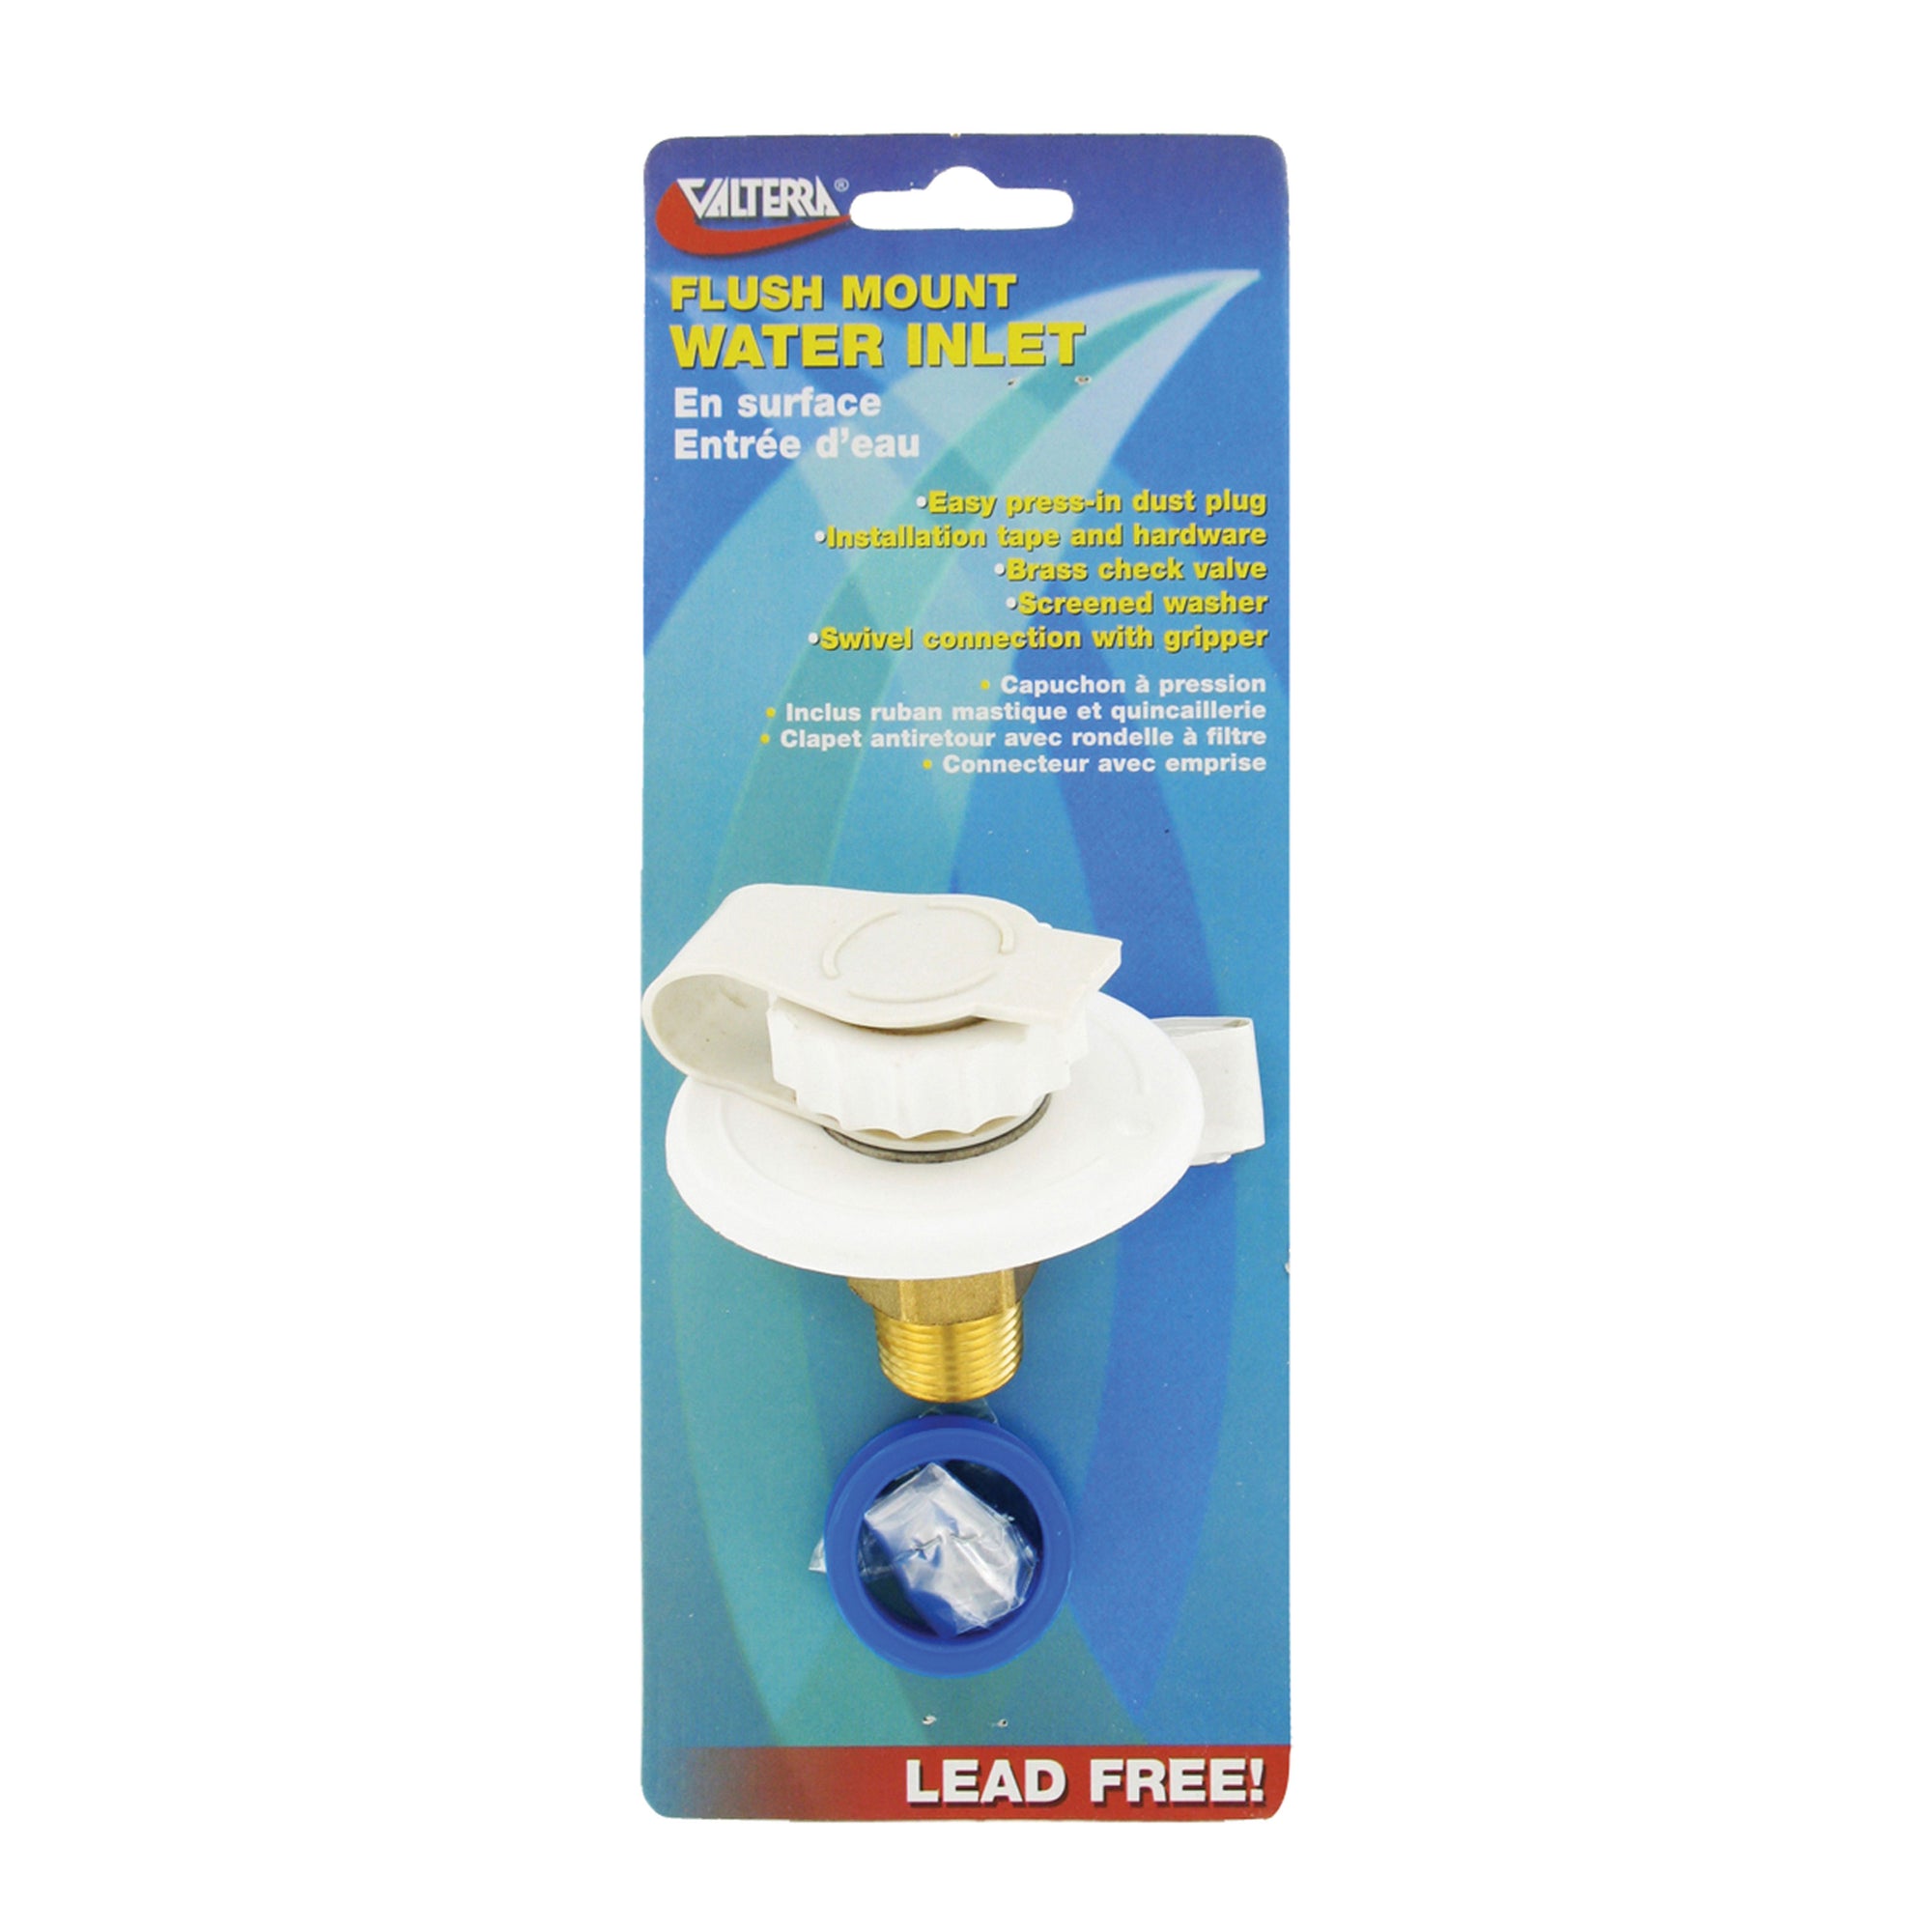 Valterra A01-0170LFVP Flush-Mount Water Inlet - MPT, 2-3/4" Flange, Brass, White (Carded)